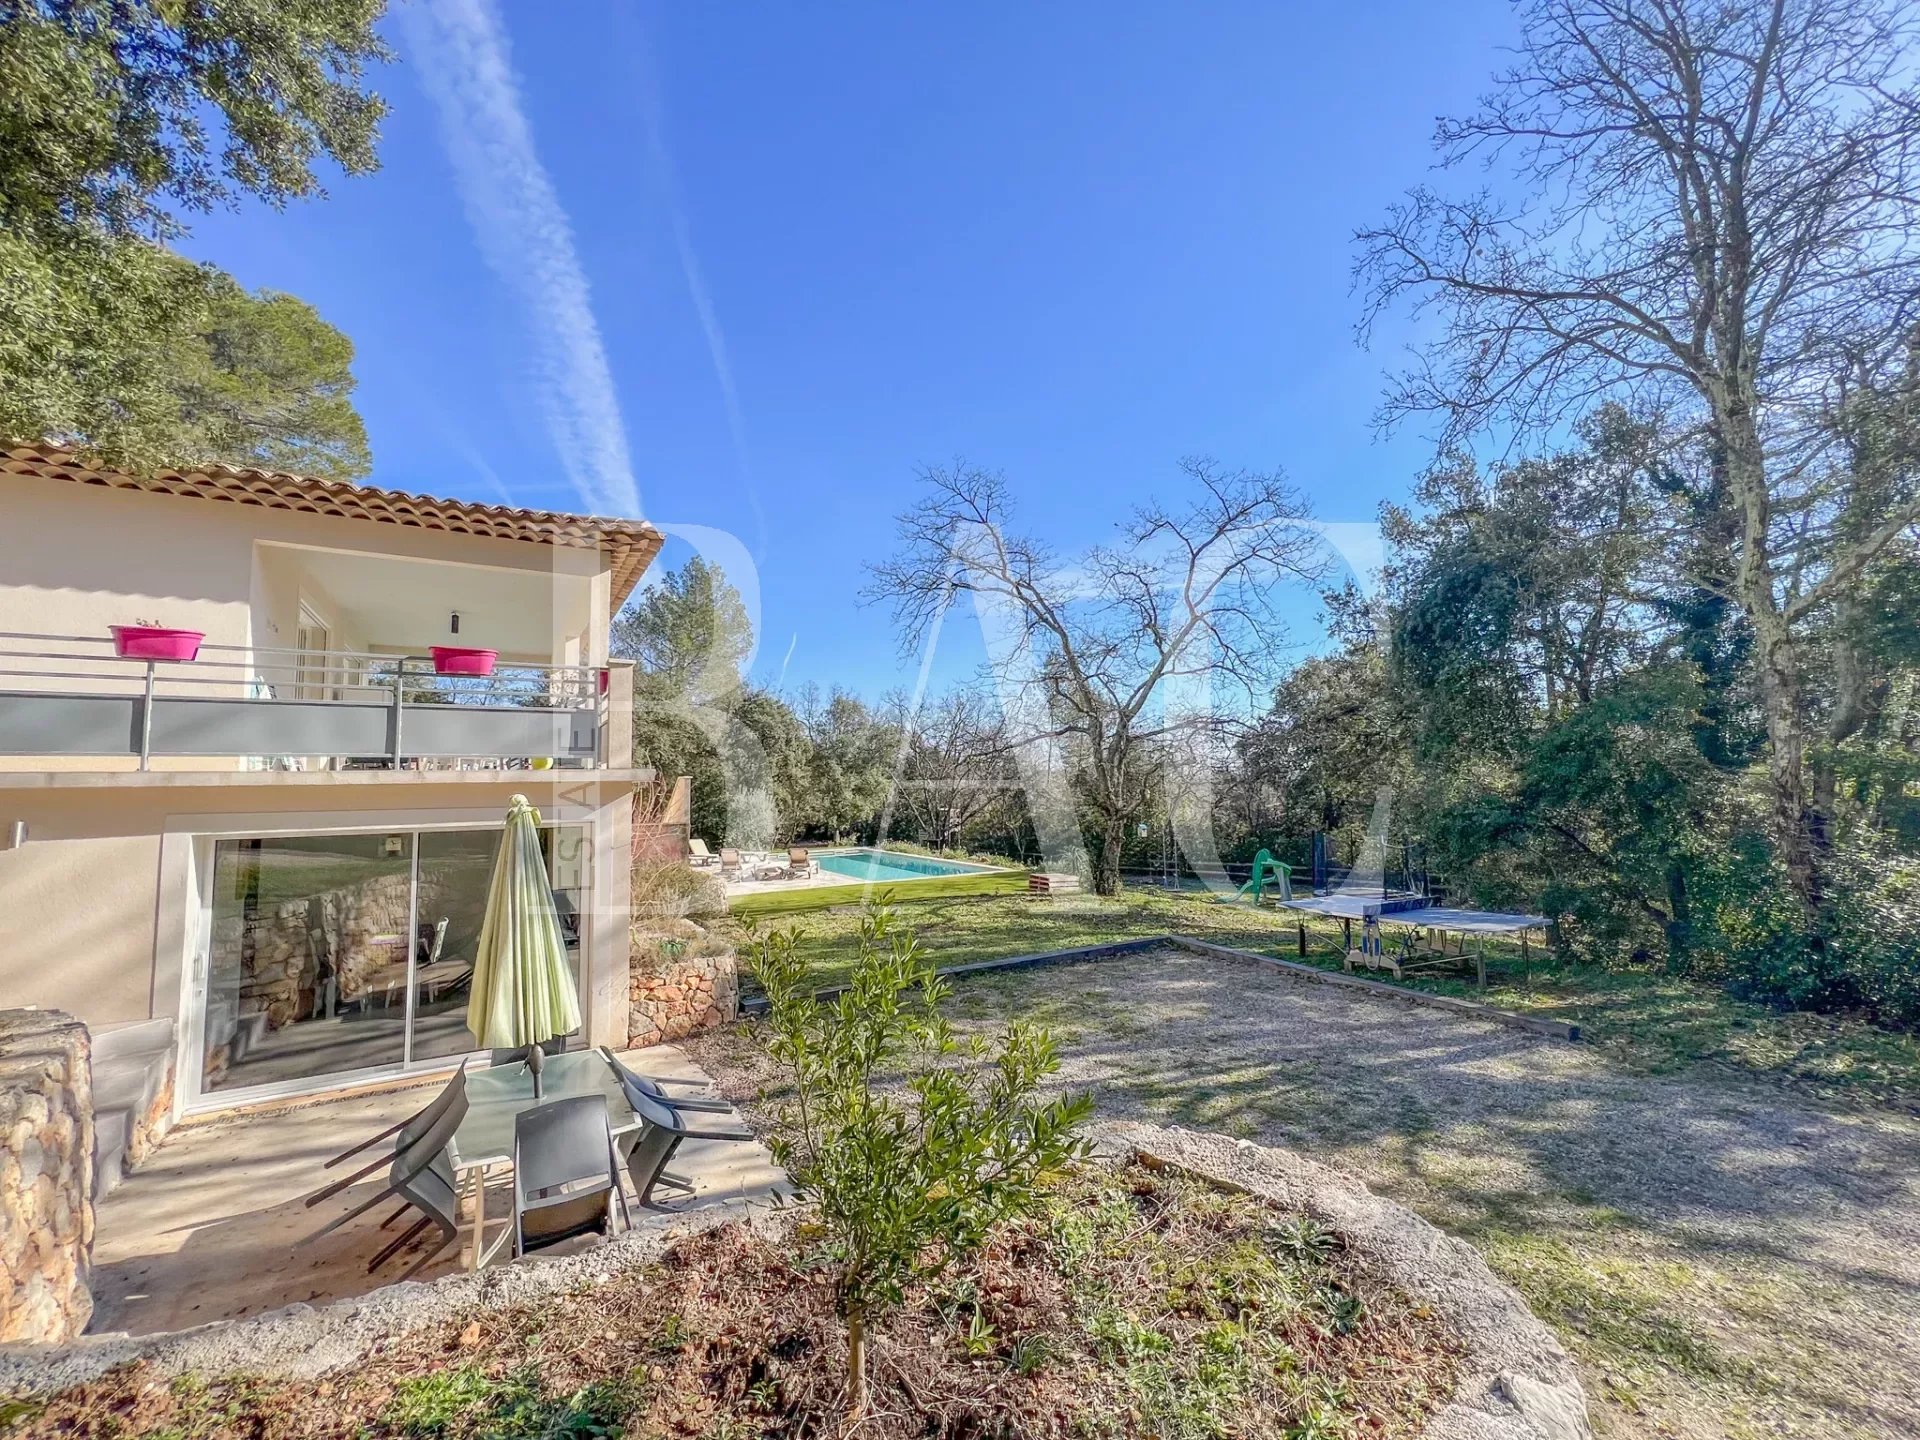 Lorgues - beautiful villa located 5 minutes from the center of the village, in the heart of a wooded environment.